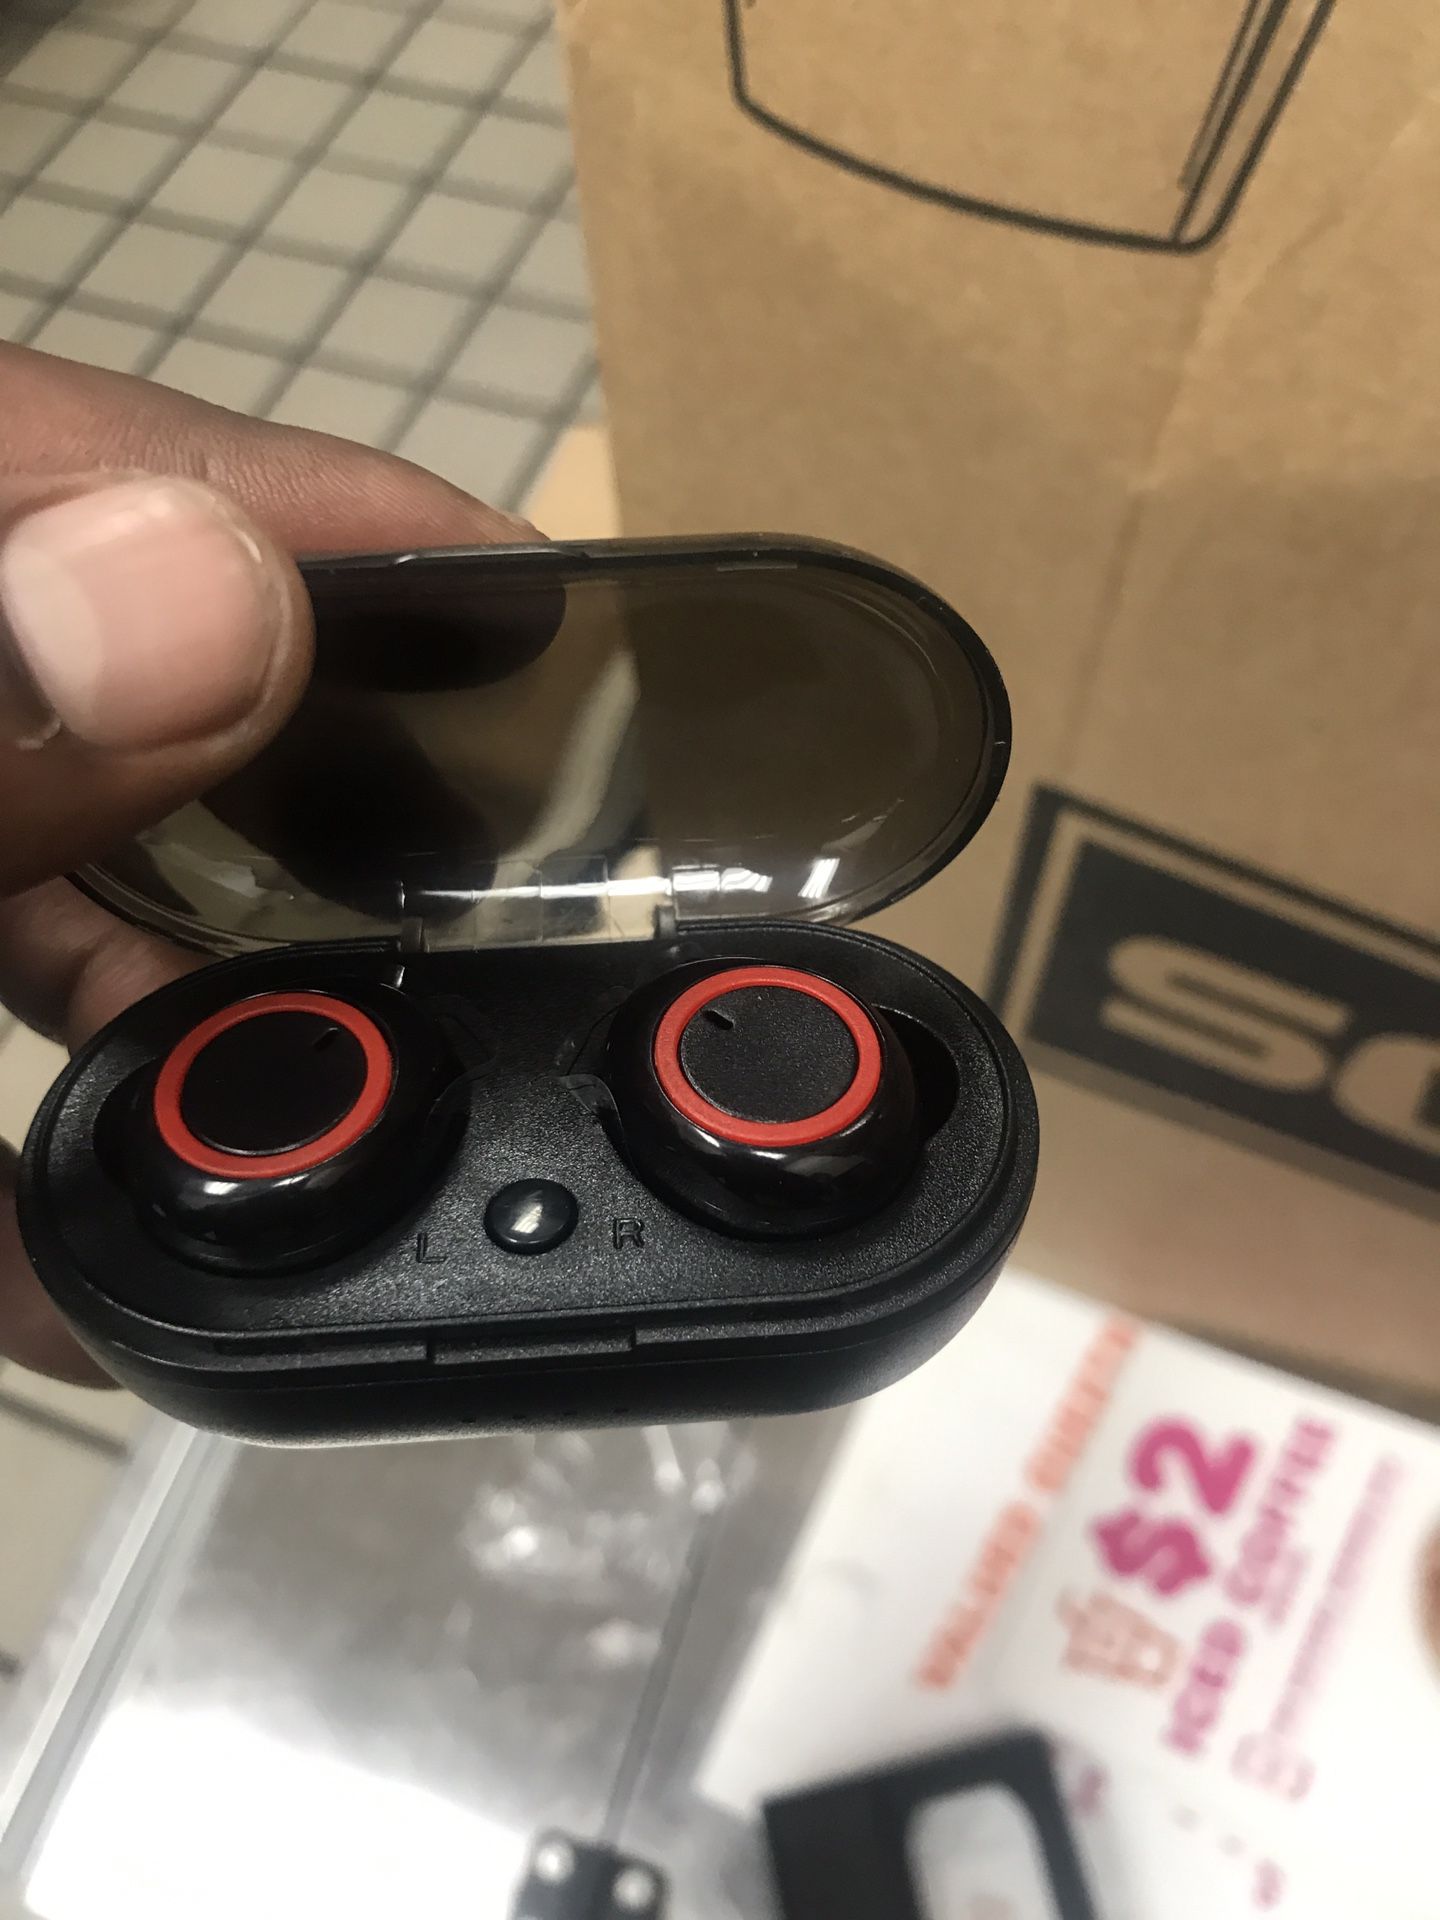 High quality Bluetooth earbuds